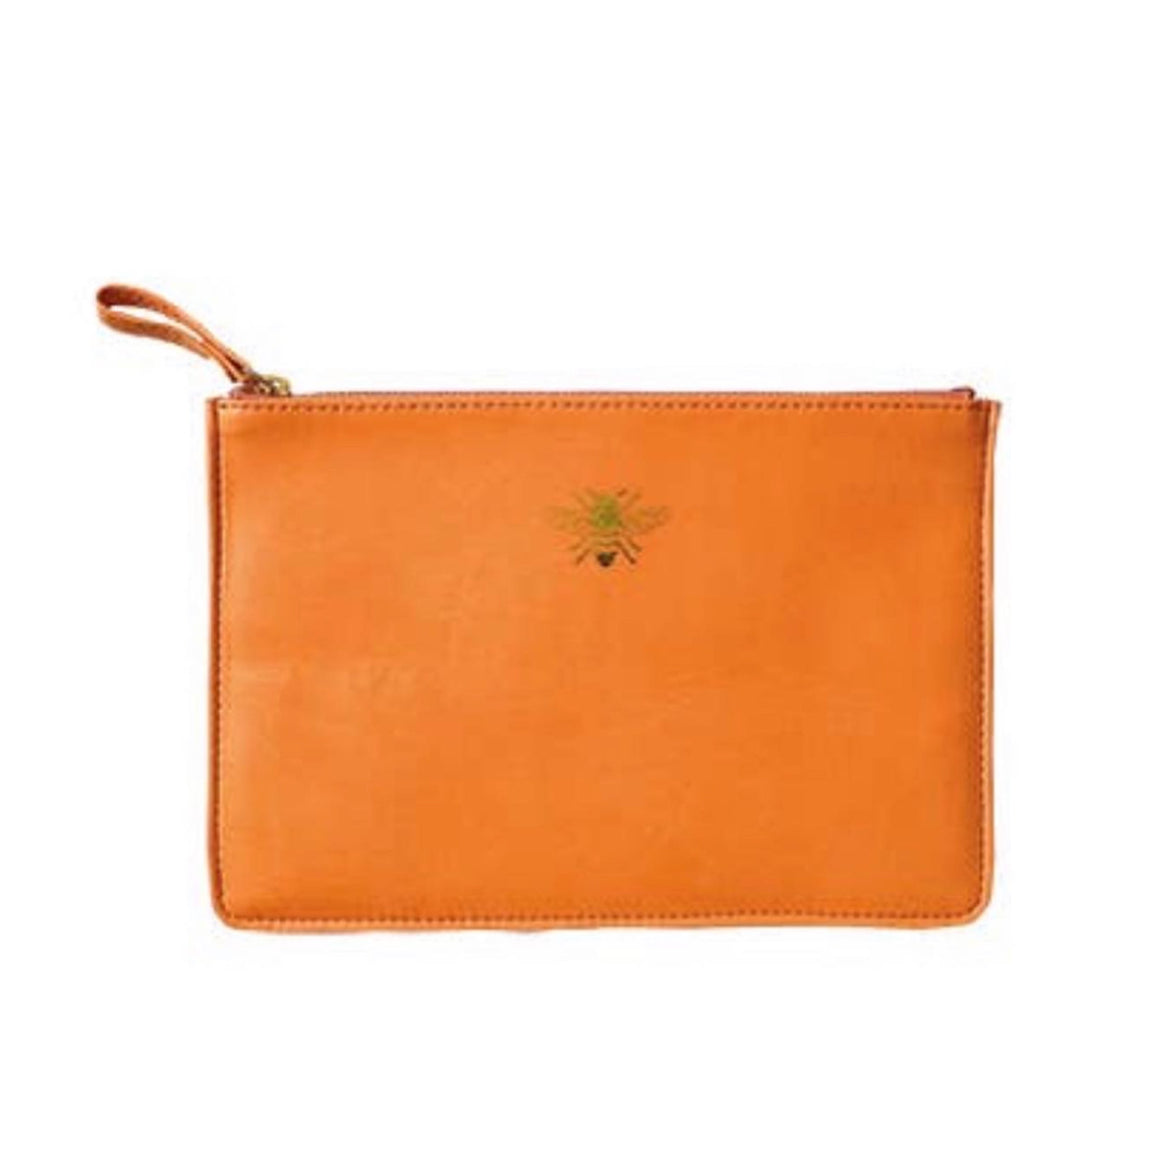 ORANGE BEE MAKEUP COSMETIC POUCH